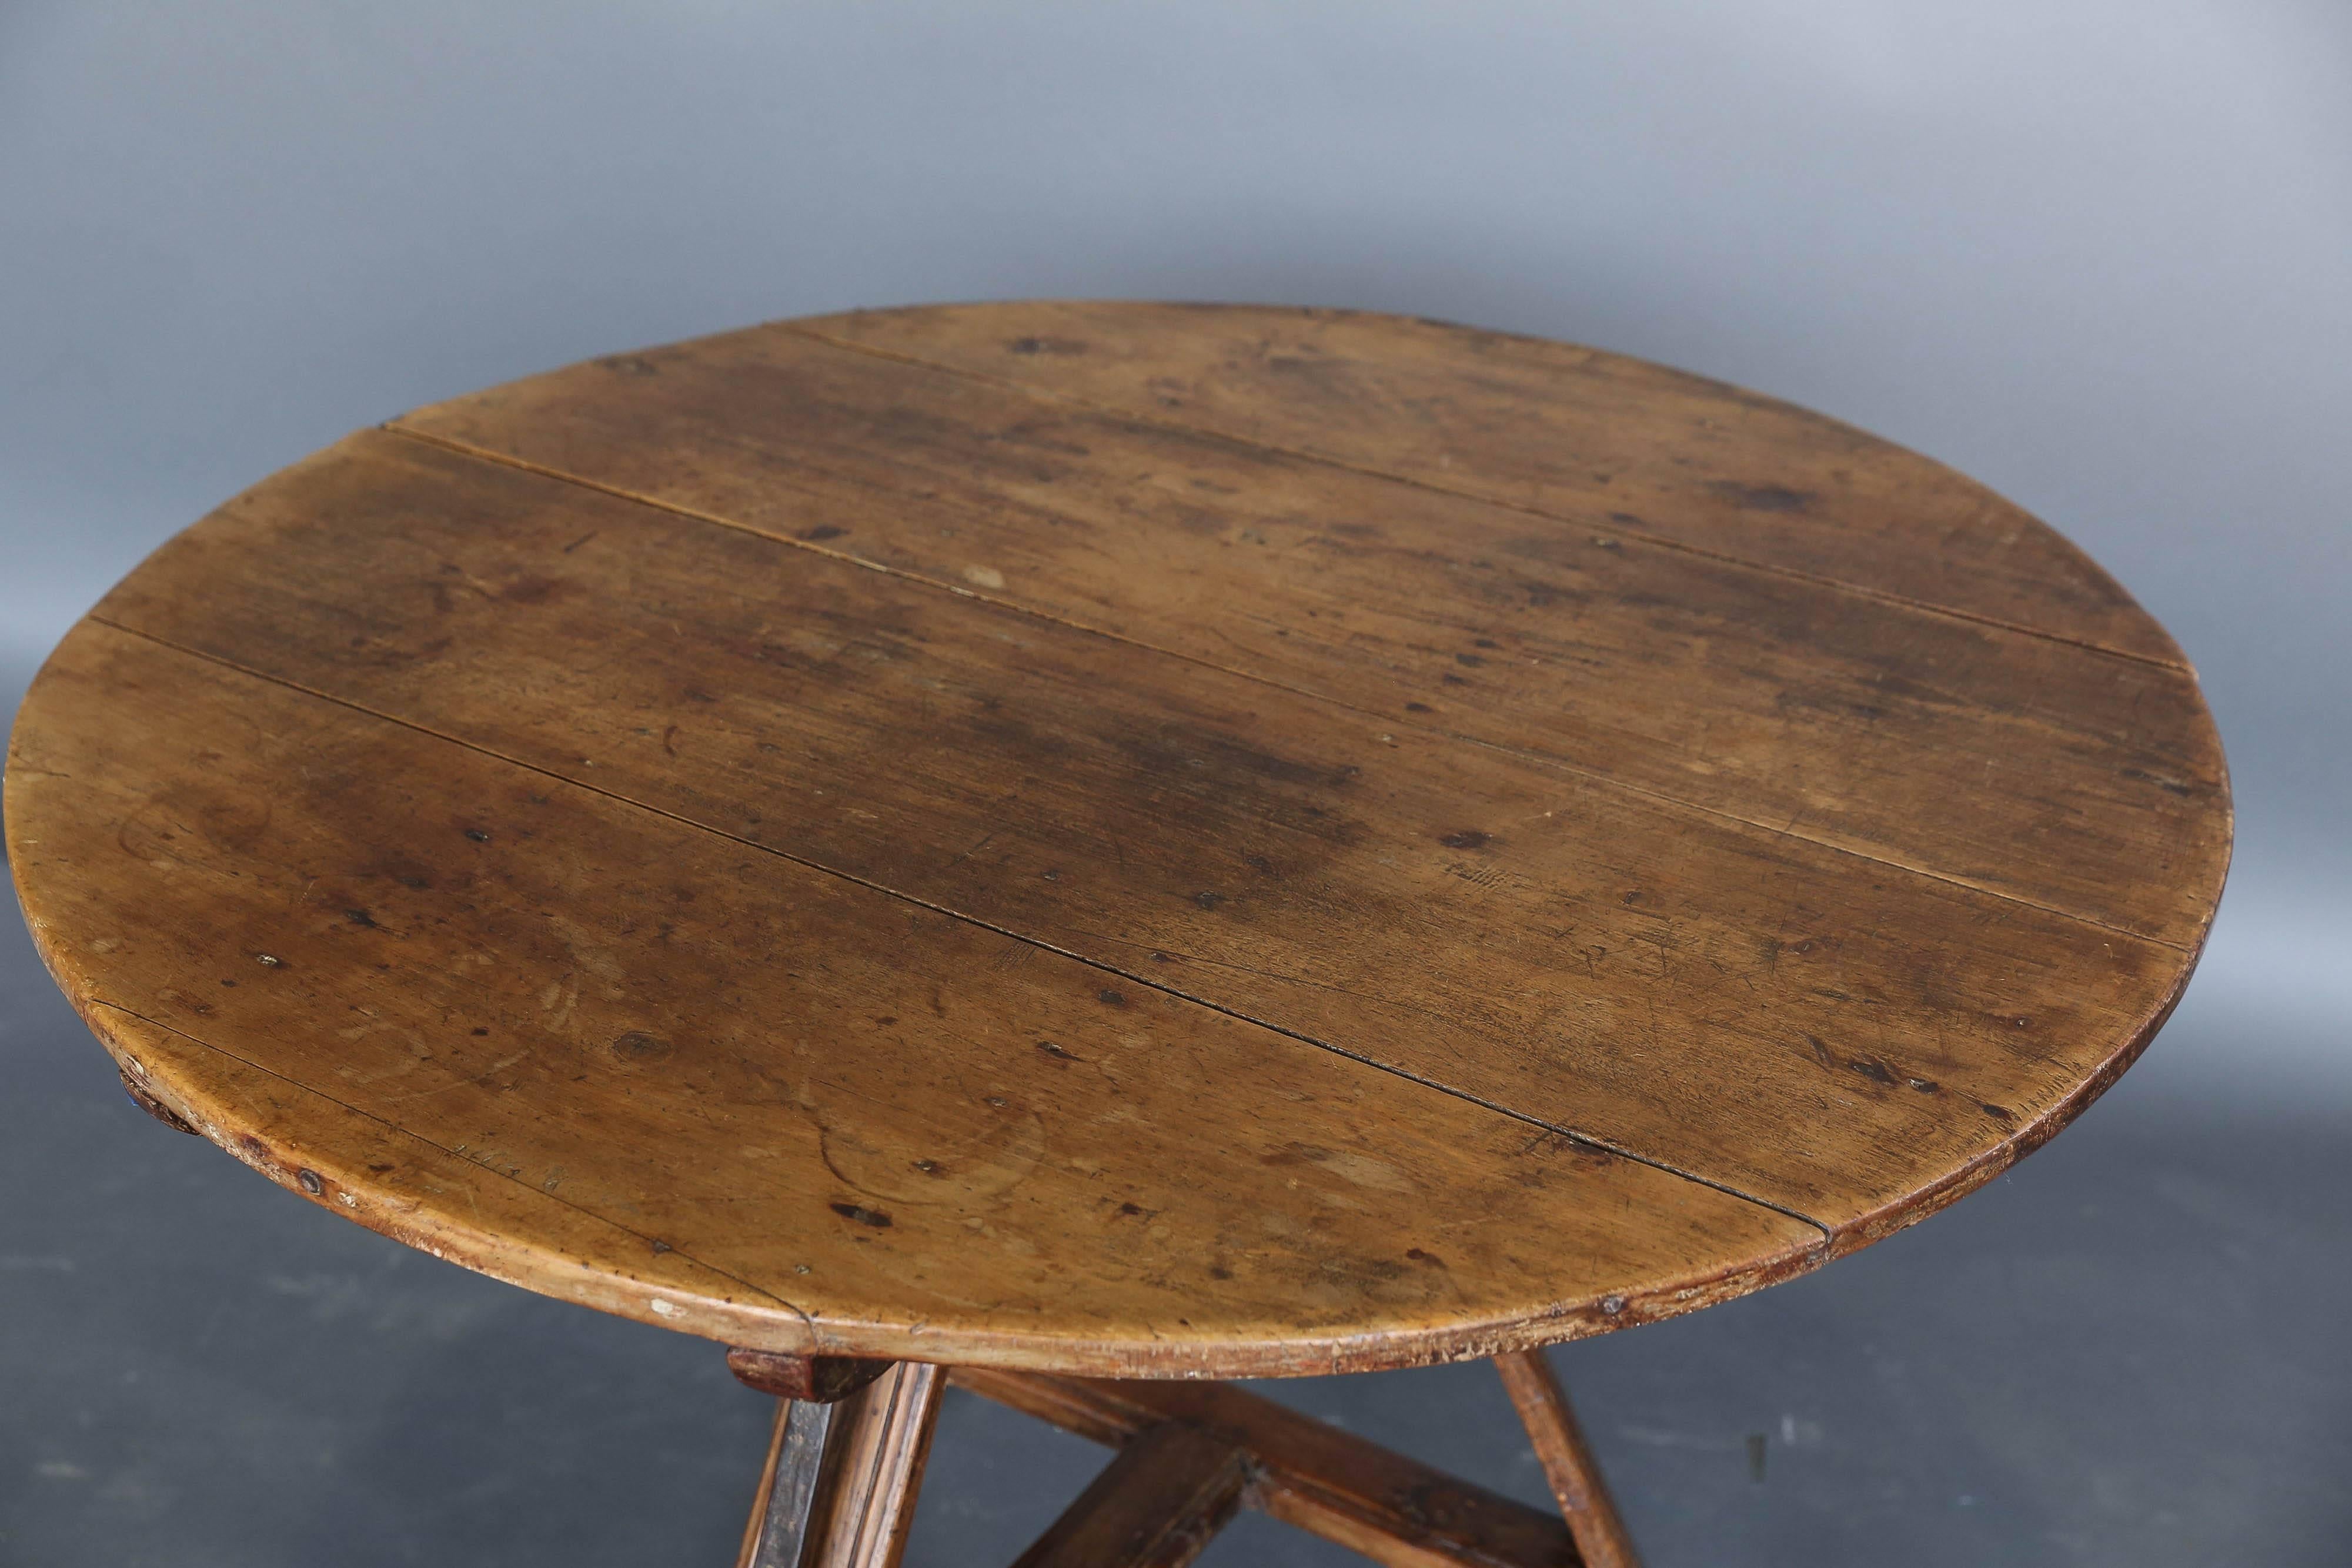 19th century round Dutch tripod table with painting on the round top. Original wrought iron hardware.